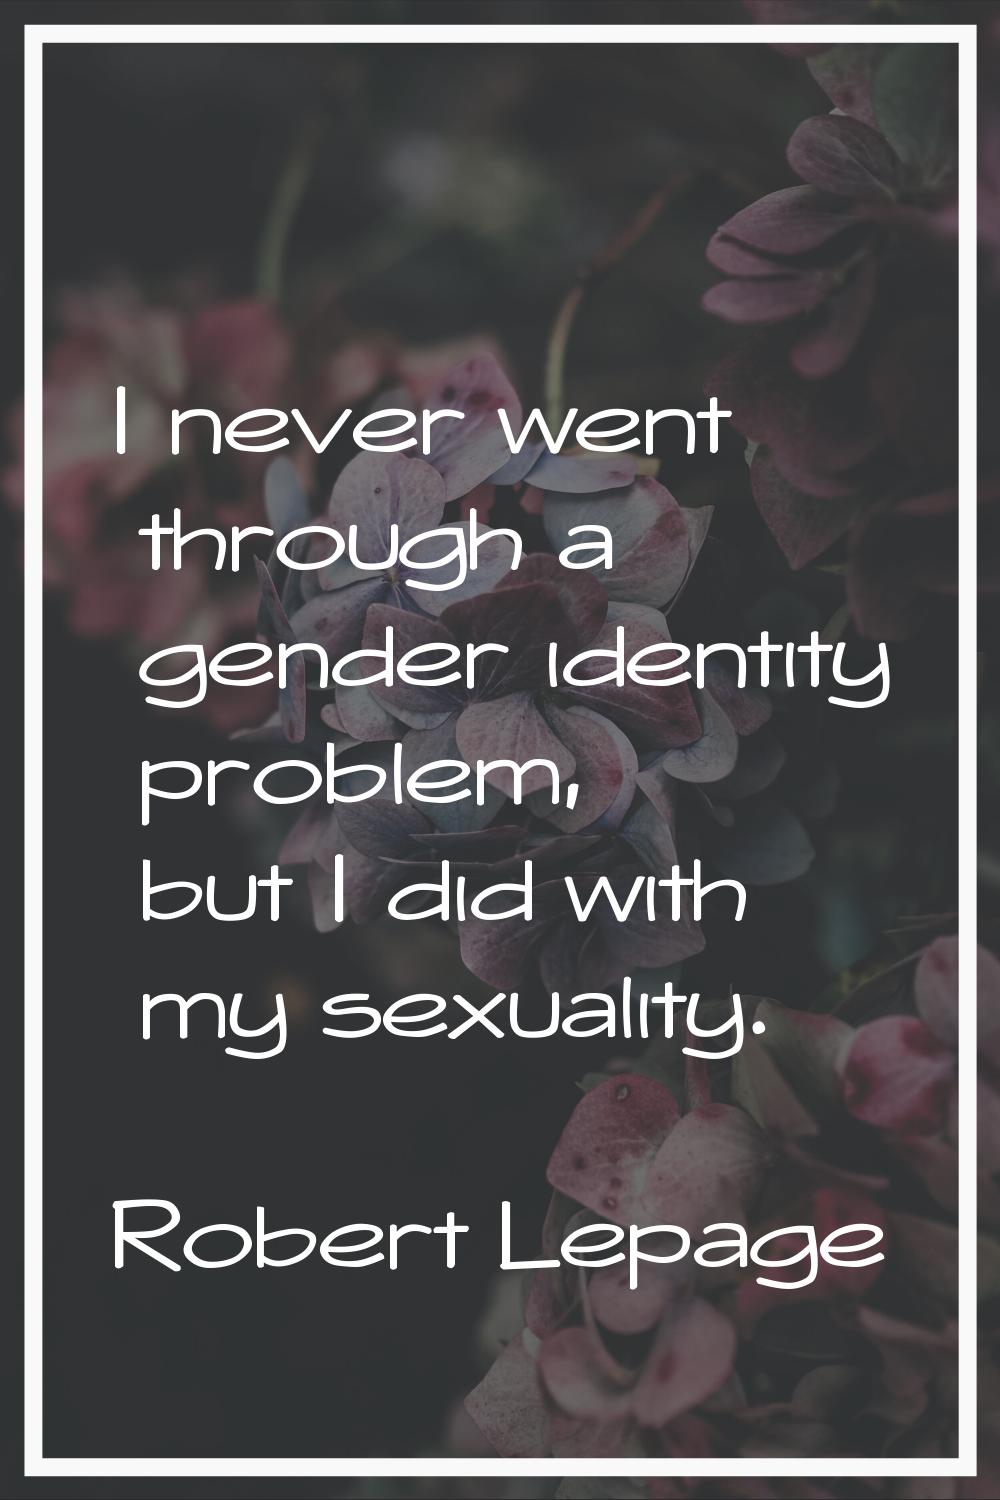 I never went through a gender identity problem, but I did with my sexuality.